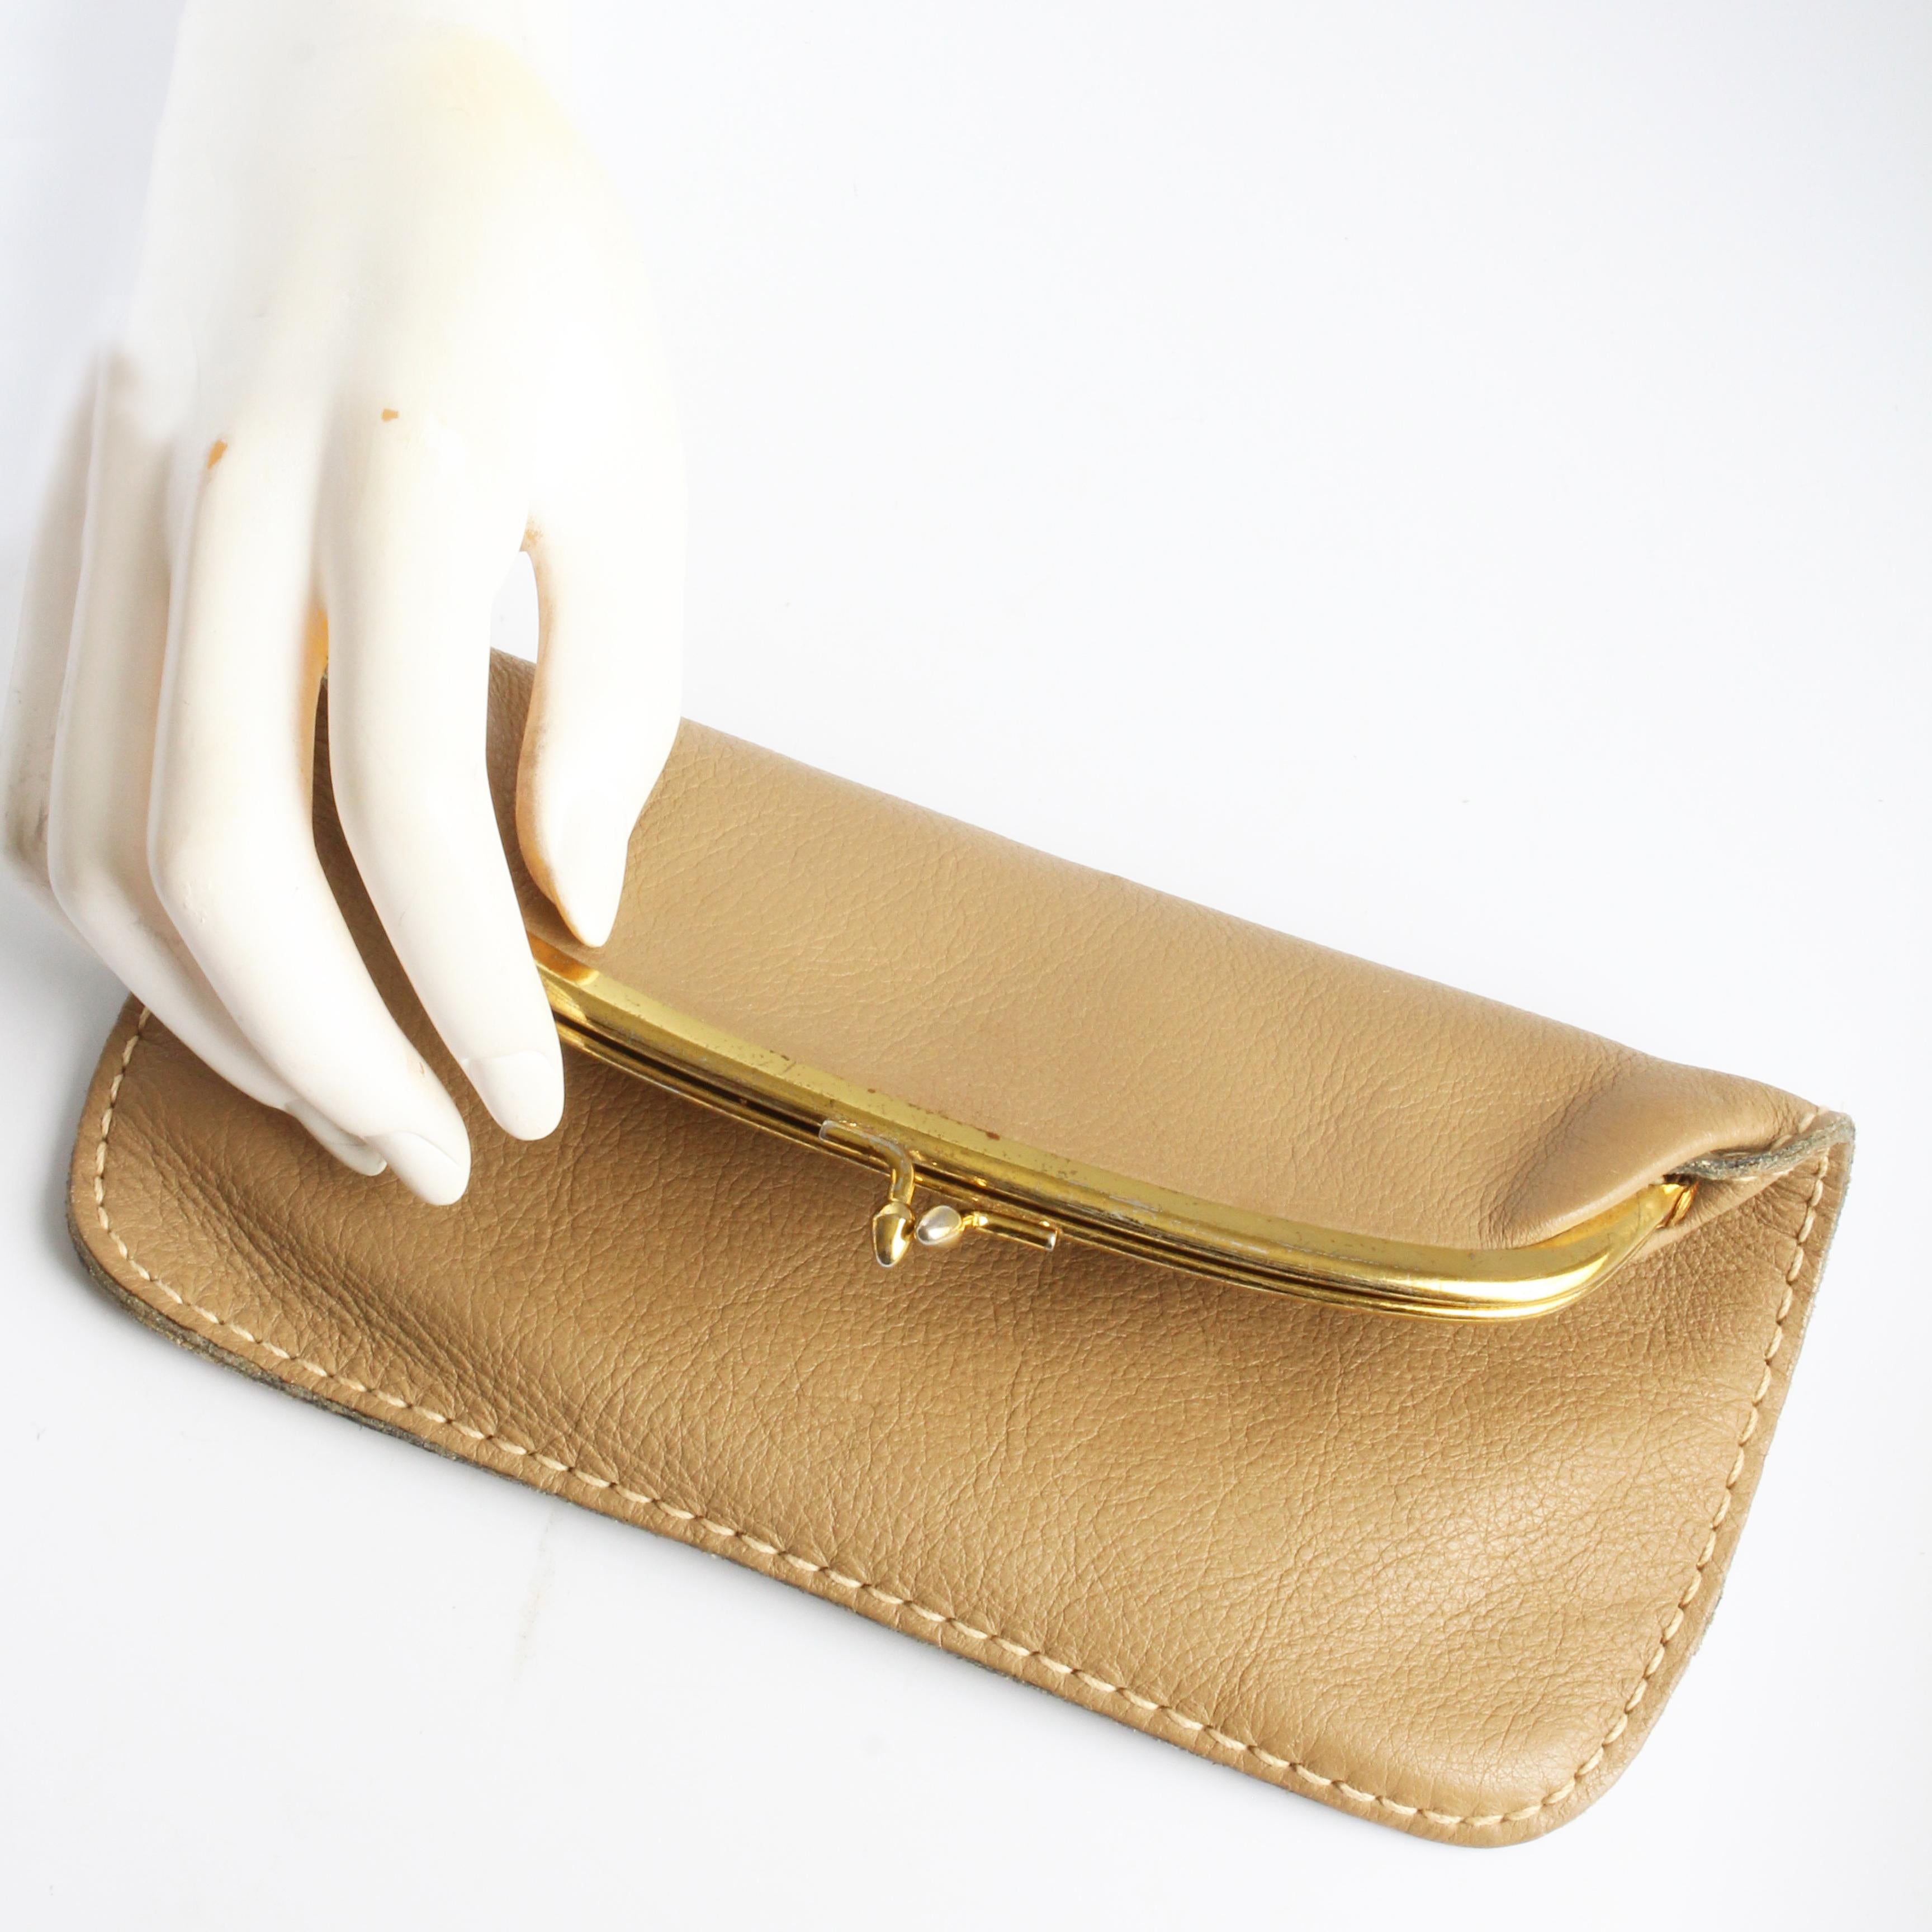 Bonnie Cashin for Coach Foldover Purse Clutch Bag Cashin Carry 60s Tan Leather  In Good Condition For Sale In Port Saint Lucie, FL